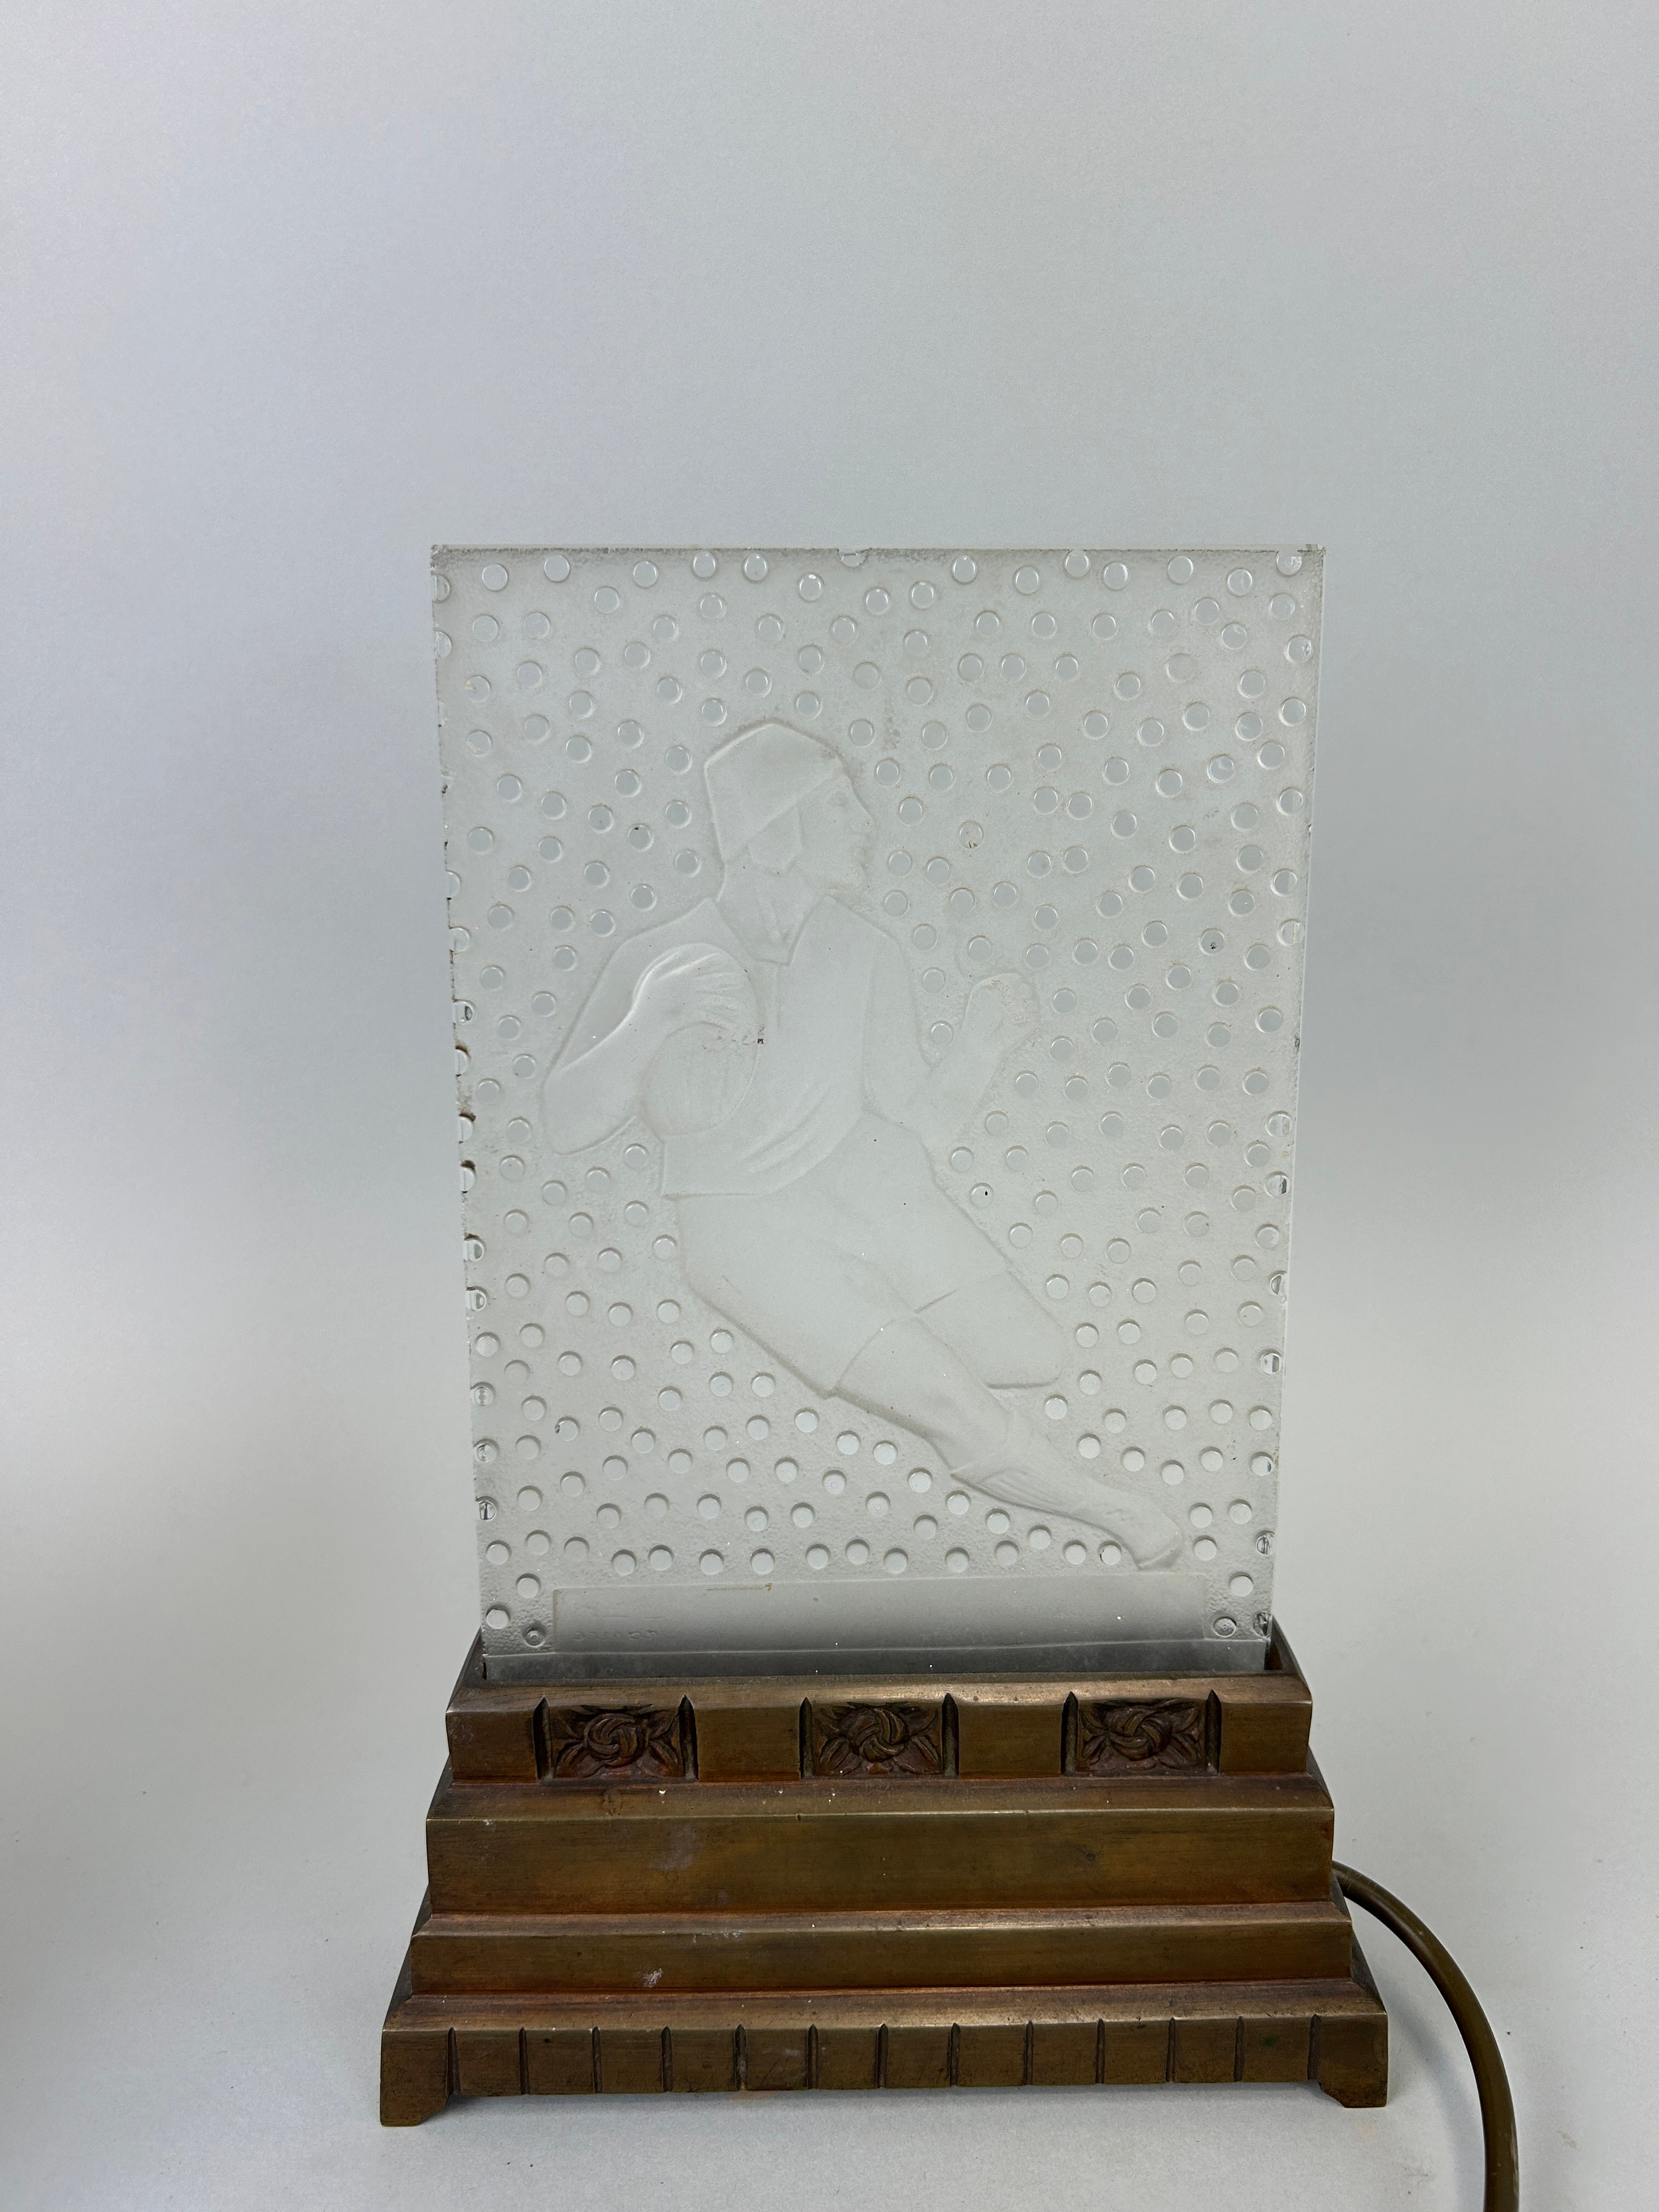 AN ART DECO VERLYS PRESSED GLASS LIGHT ON STAND IN THE FORM OF A RUGBY PLAYER, 30cm x 19cm - Image 6 of 6